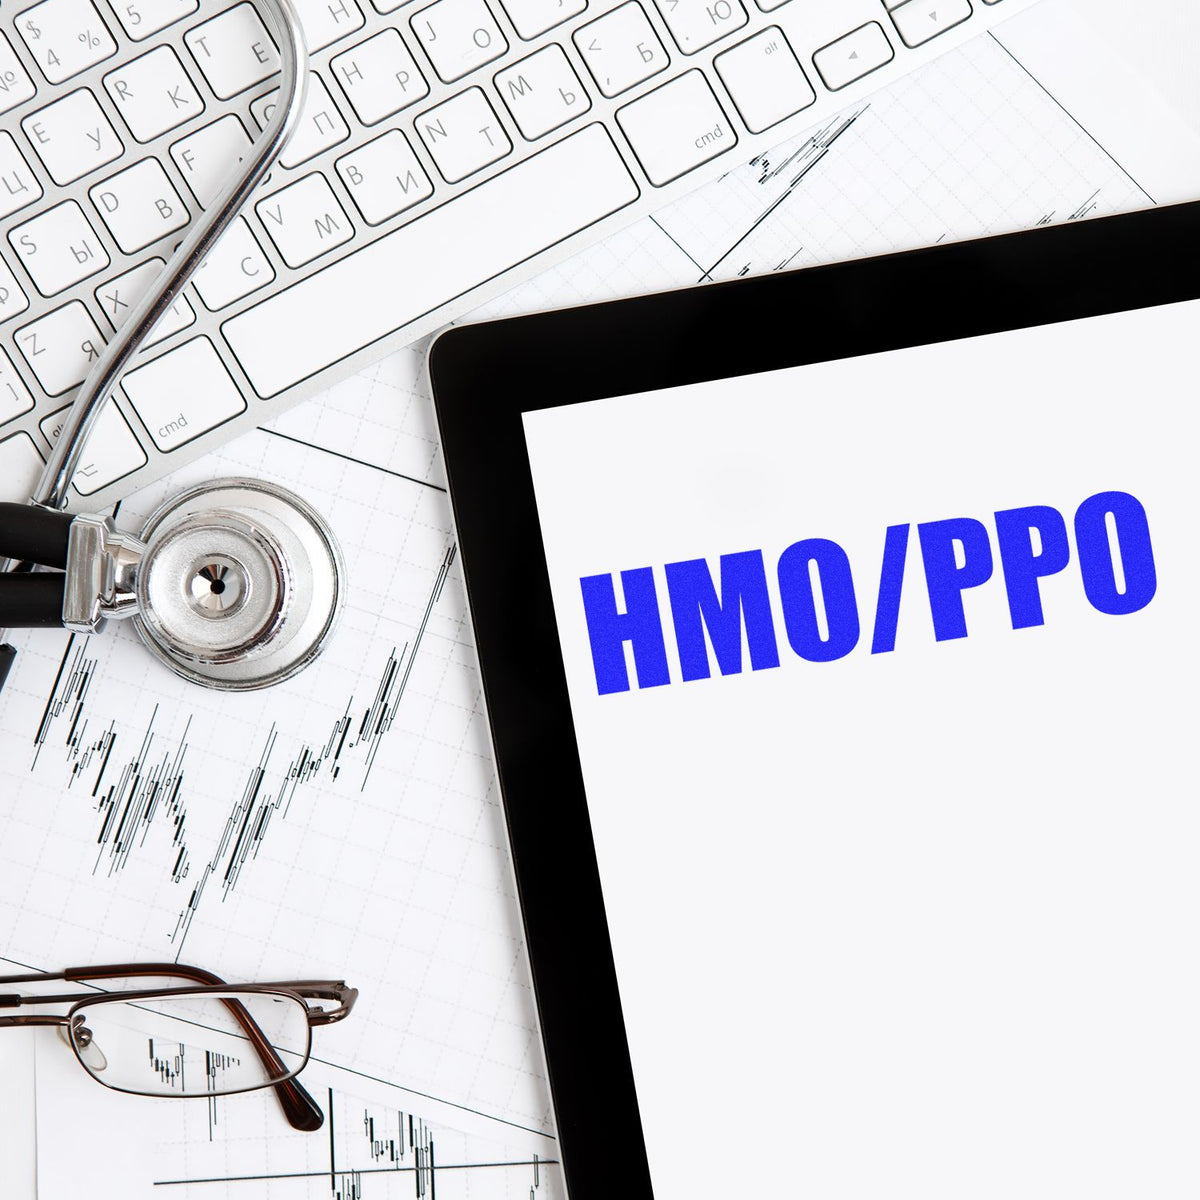 Self-Inking HMO/PPO Stamp In Use Photo